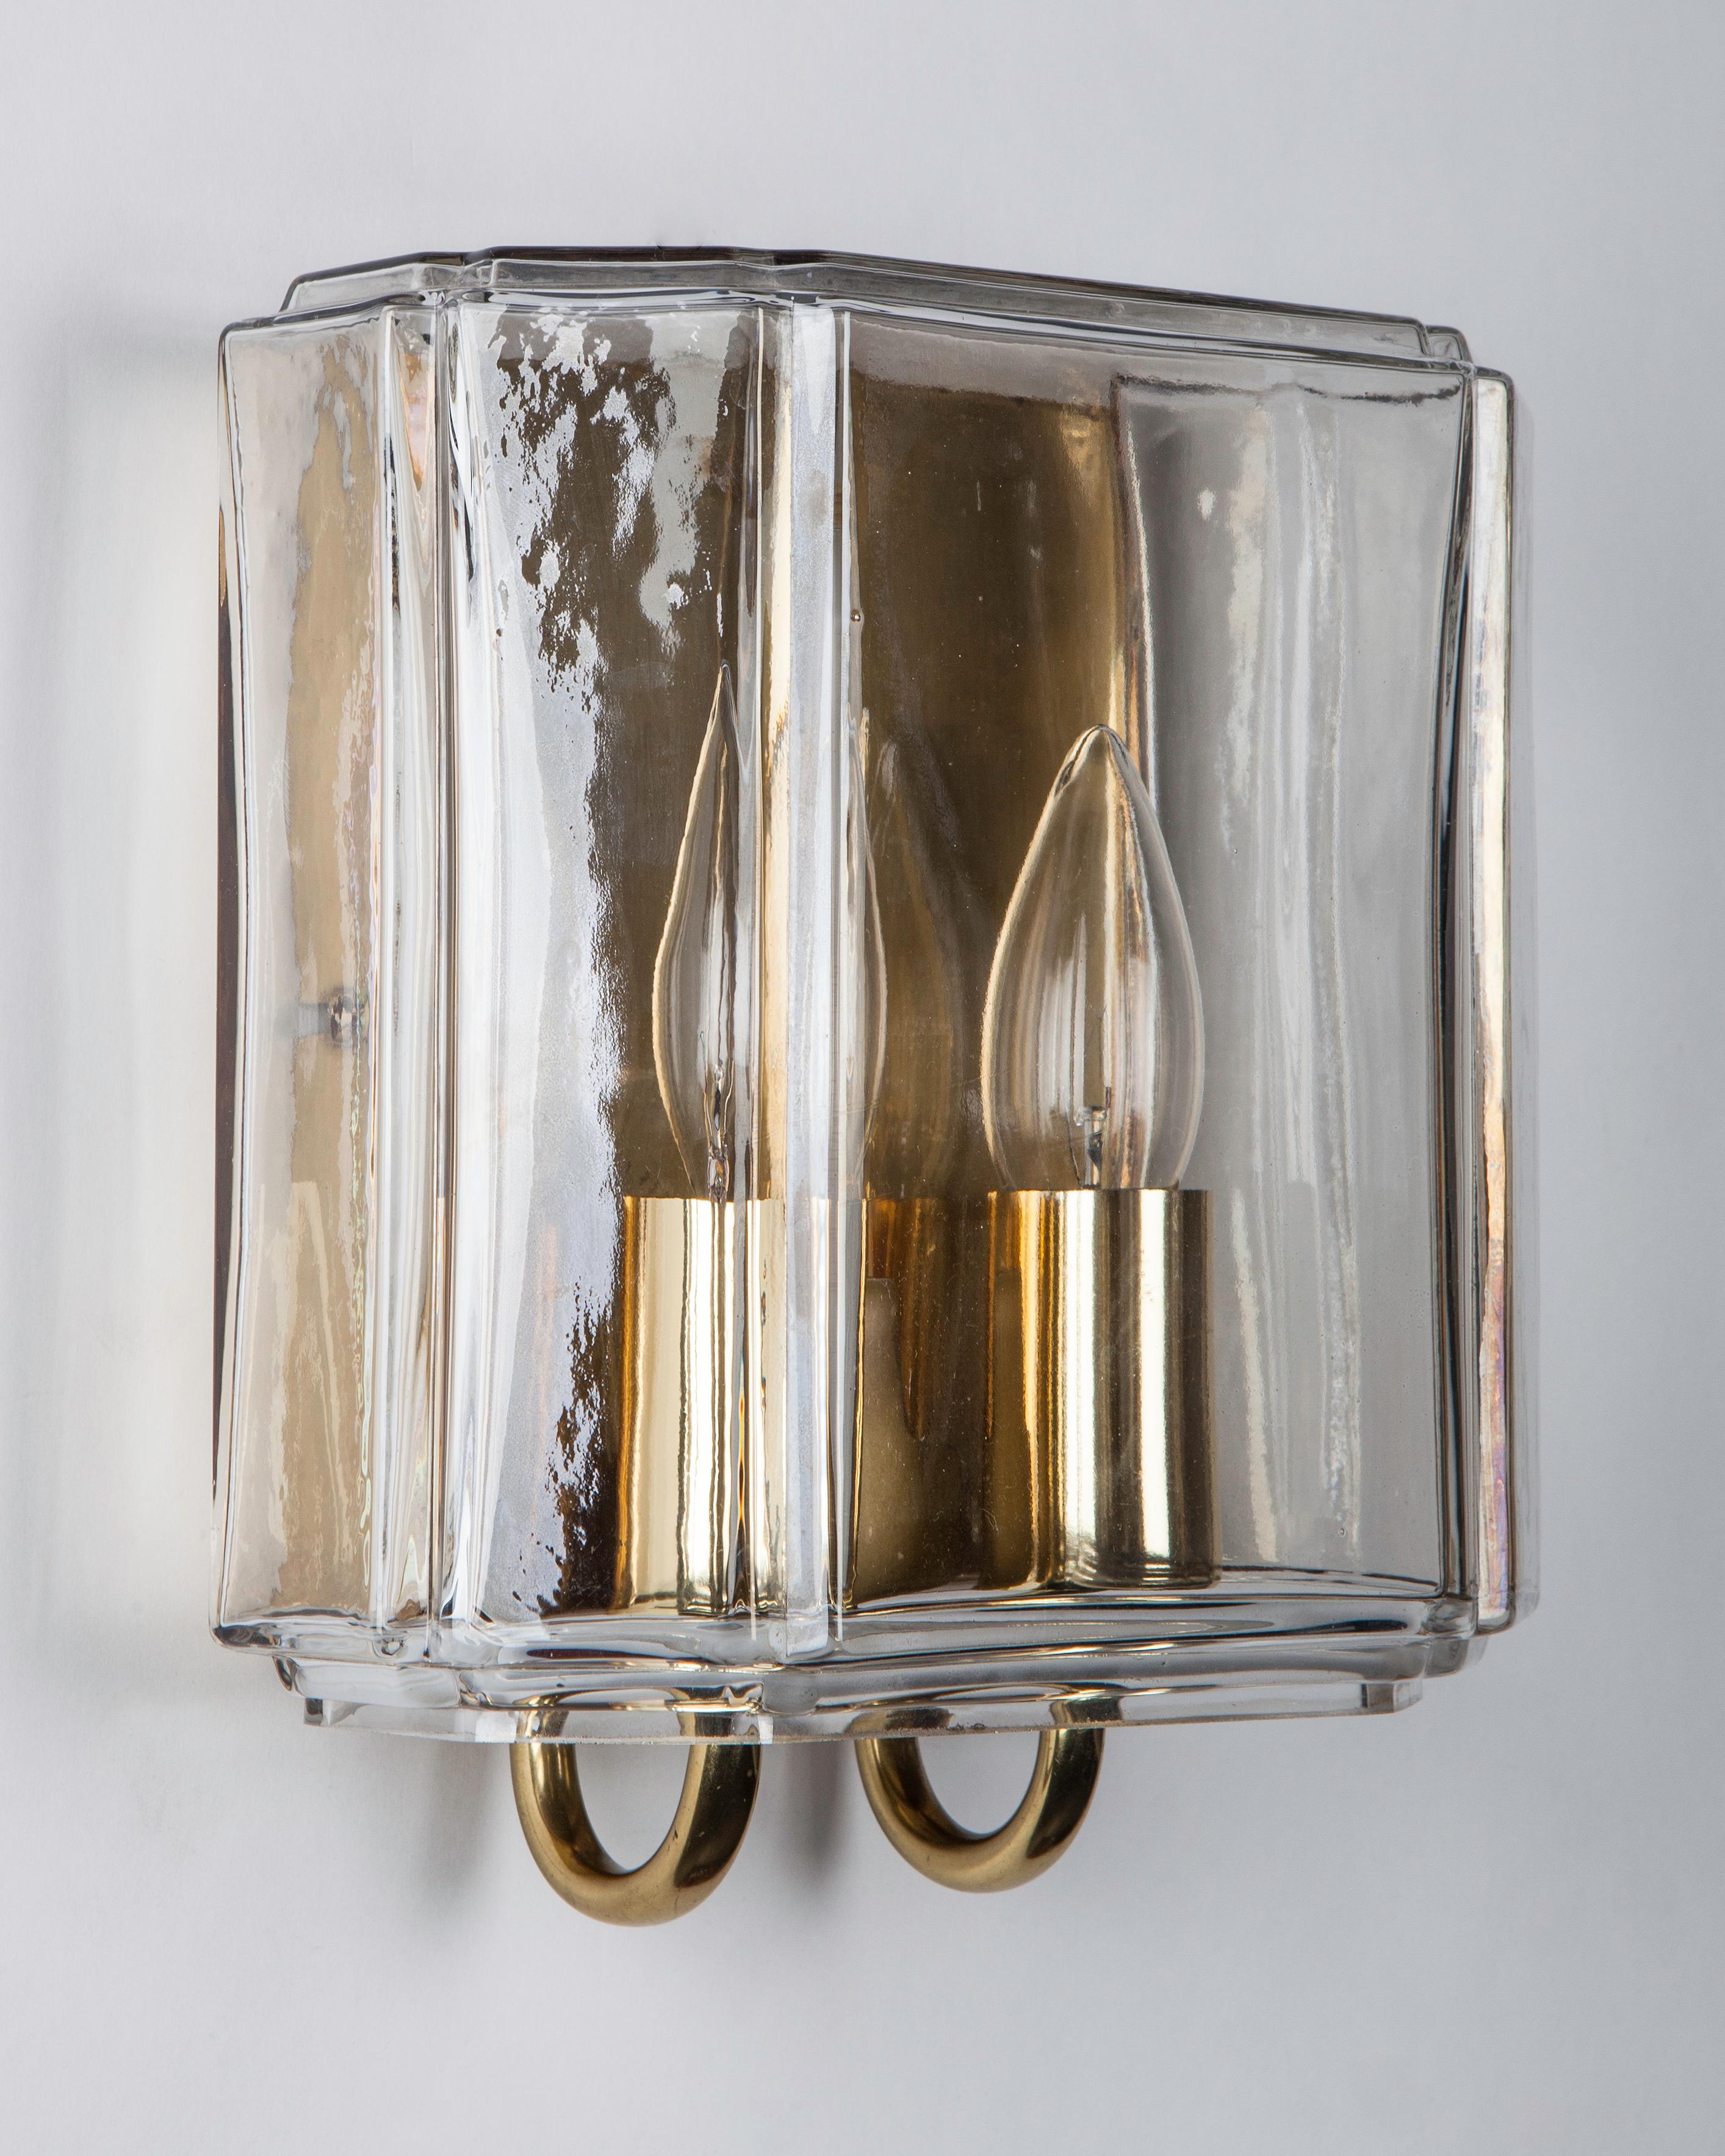 AIS3102
A pair of vintage double light sconces, each having simple aged polished brass metalwork with two arms surrounded by an unusual faceted glass lens. Attributed to the German maker Glashütte Limburg, circa 1960.

Dimensions:
Overall: 9-1/2